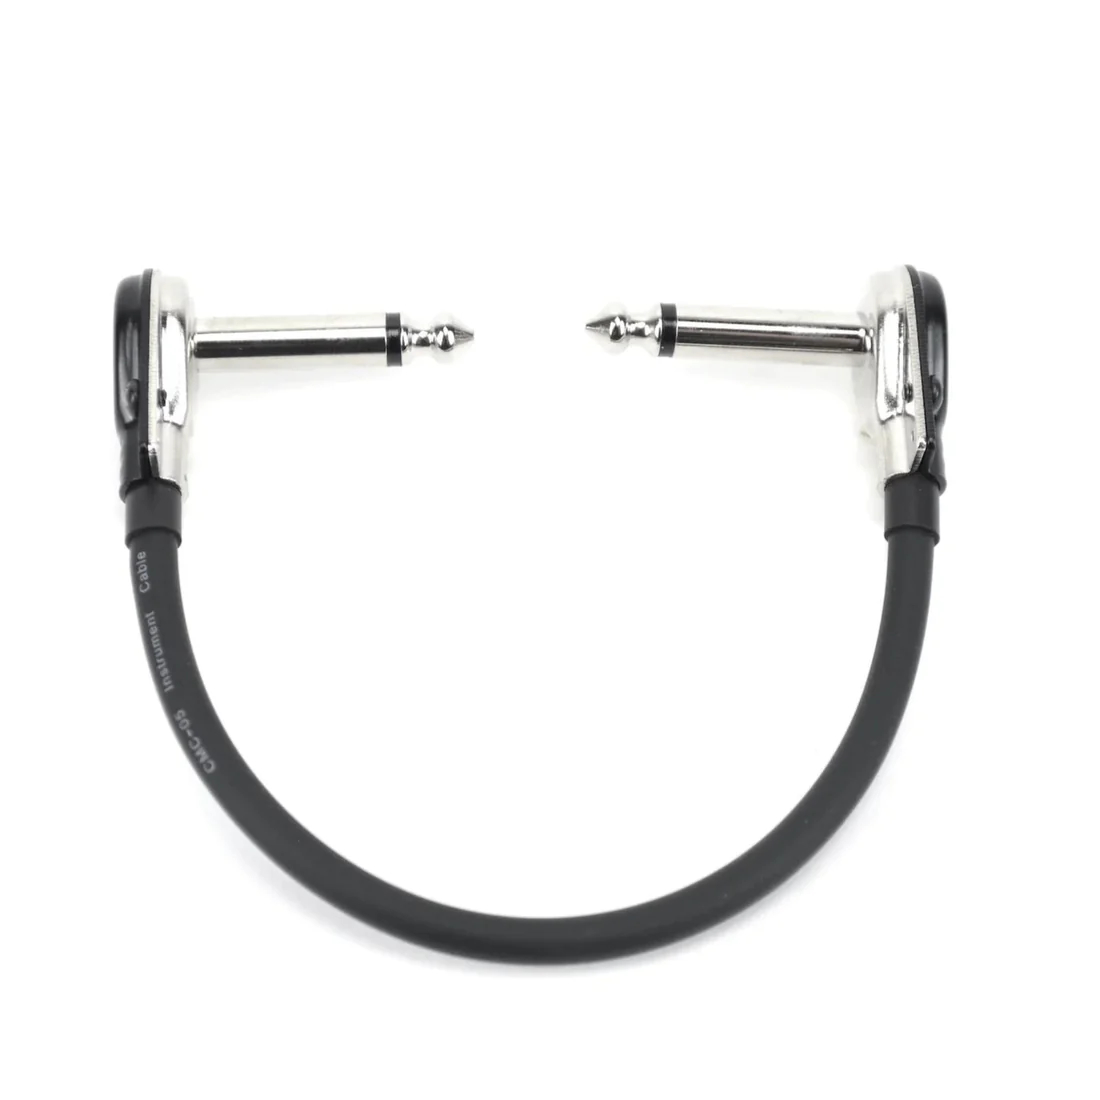 Minicake Patch Cable パッチケーブル